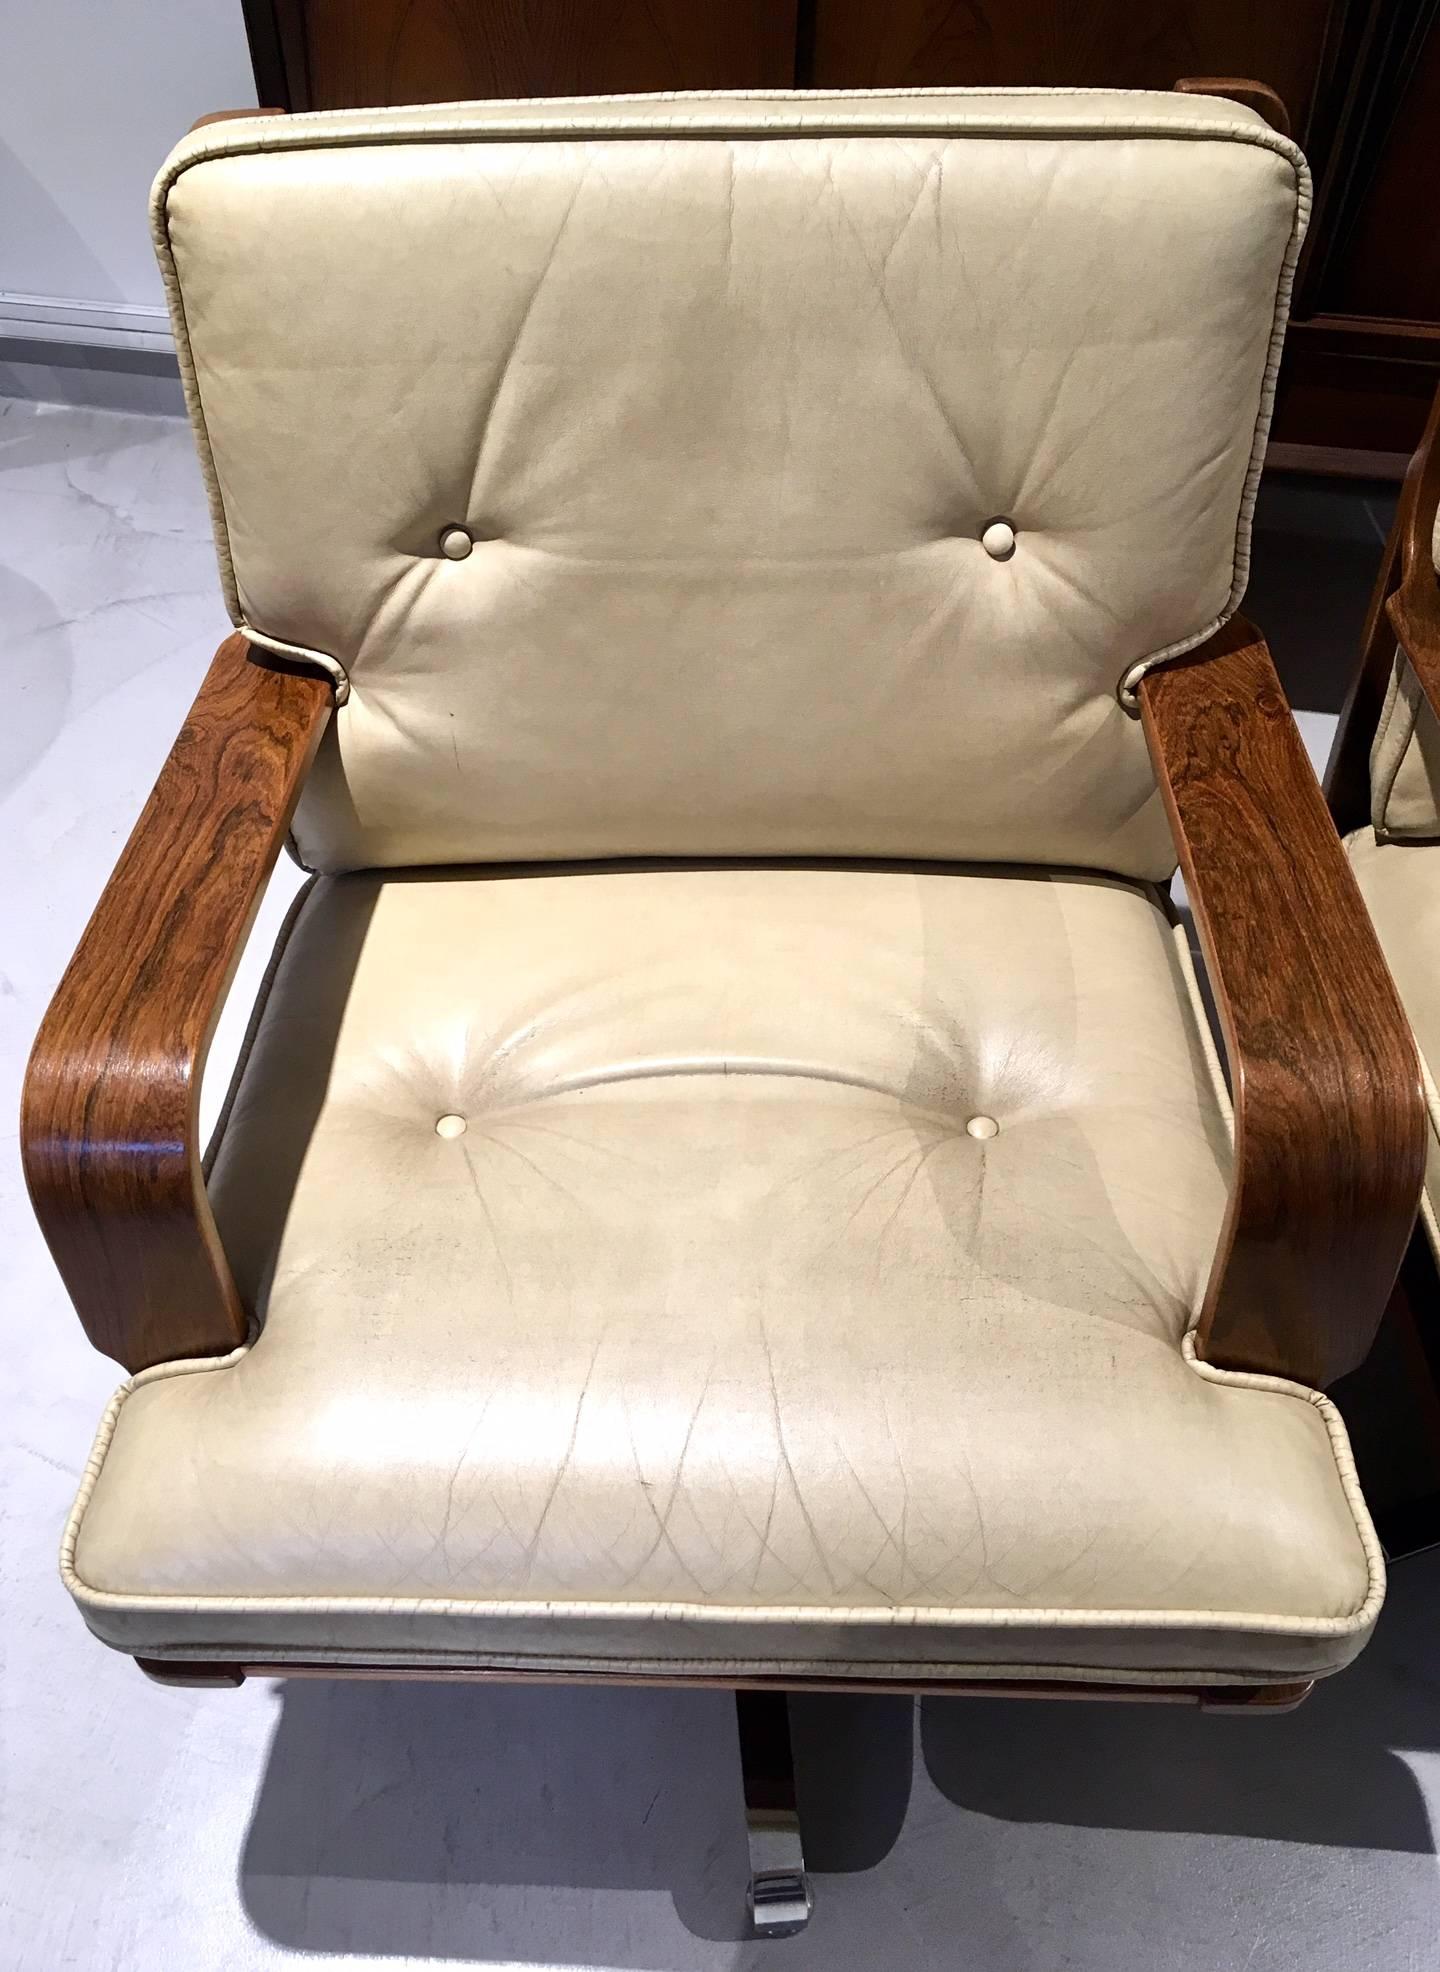 Spanish Pair of Cream-Colored Leather Swivel Armchairs with Wooden Frame